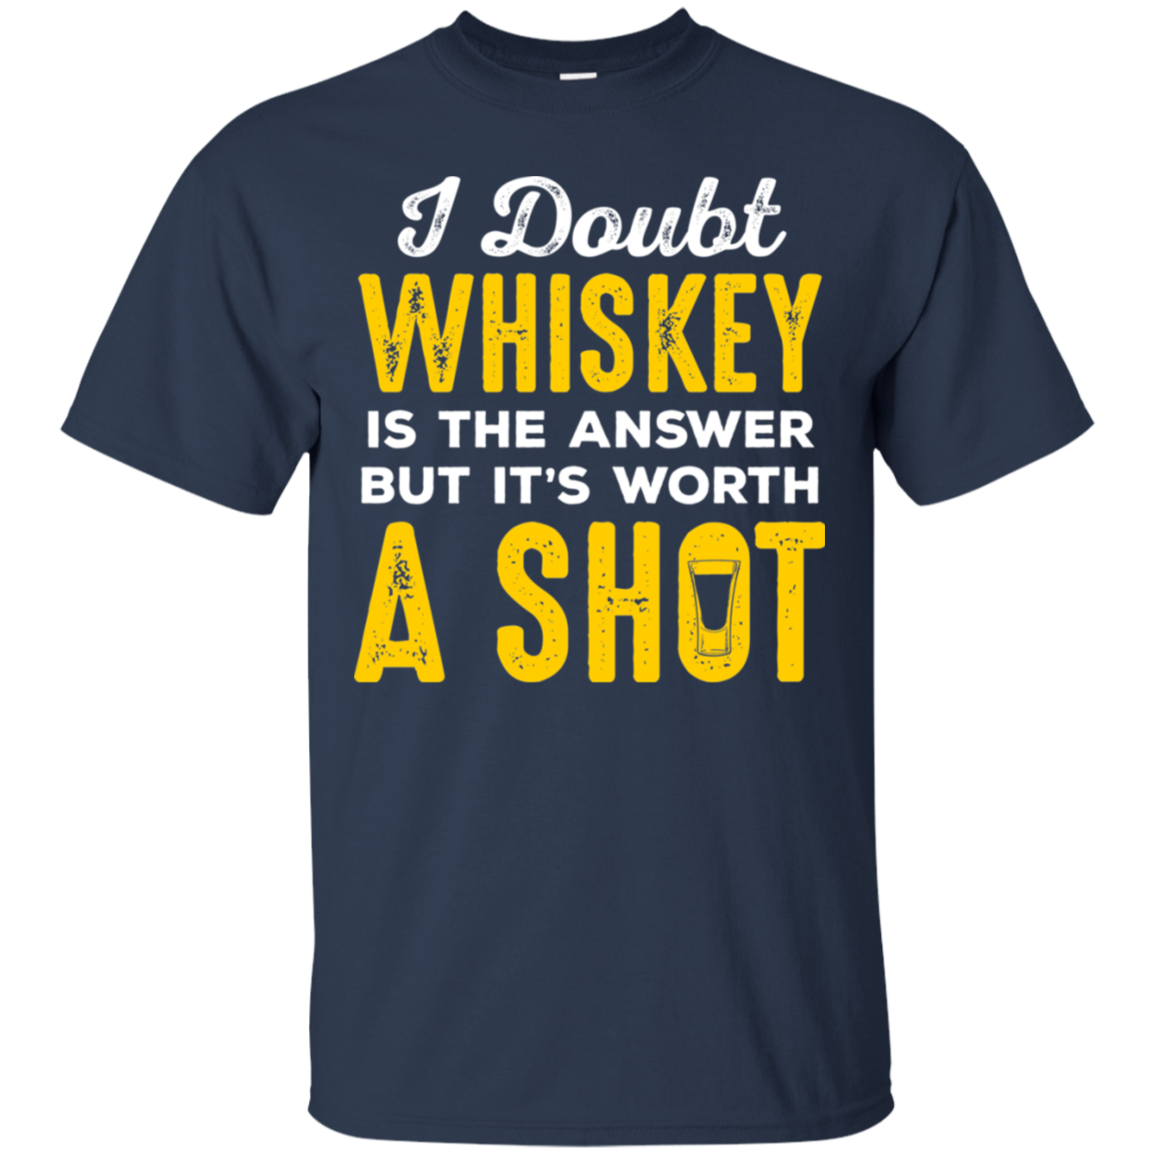 I Doubt Whiskey Is The Answer But It's Worth A Shot T-Shirt Apparel - The Beer Lodge